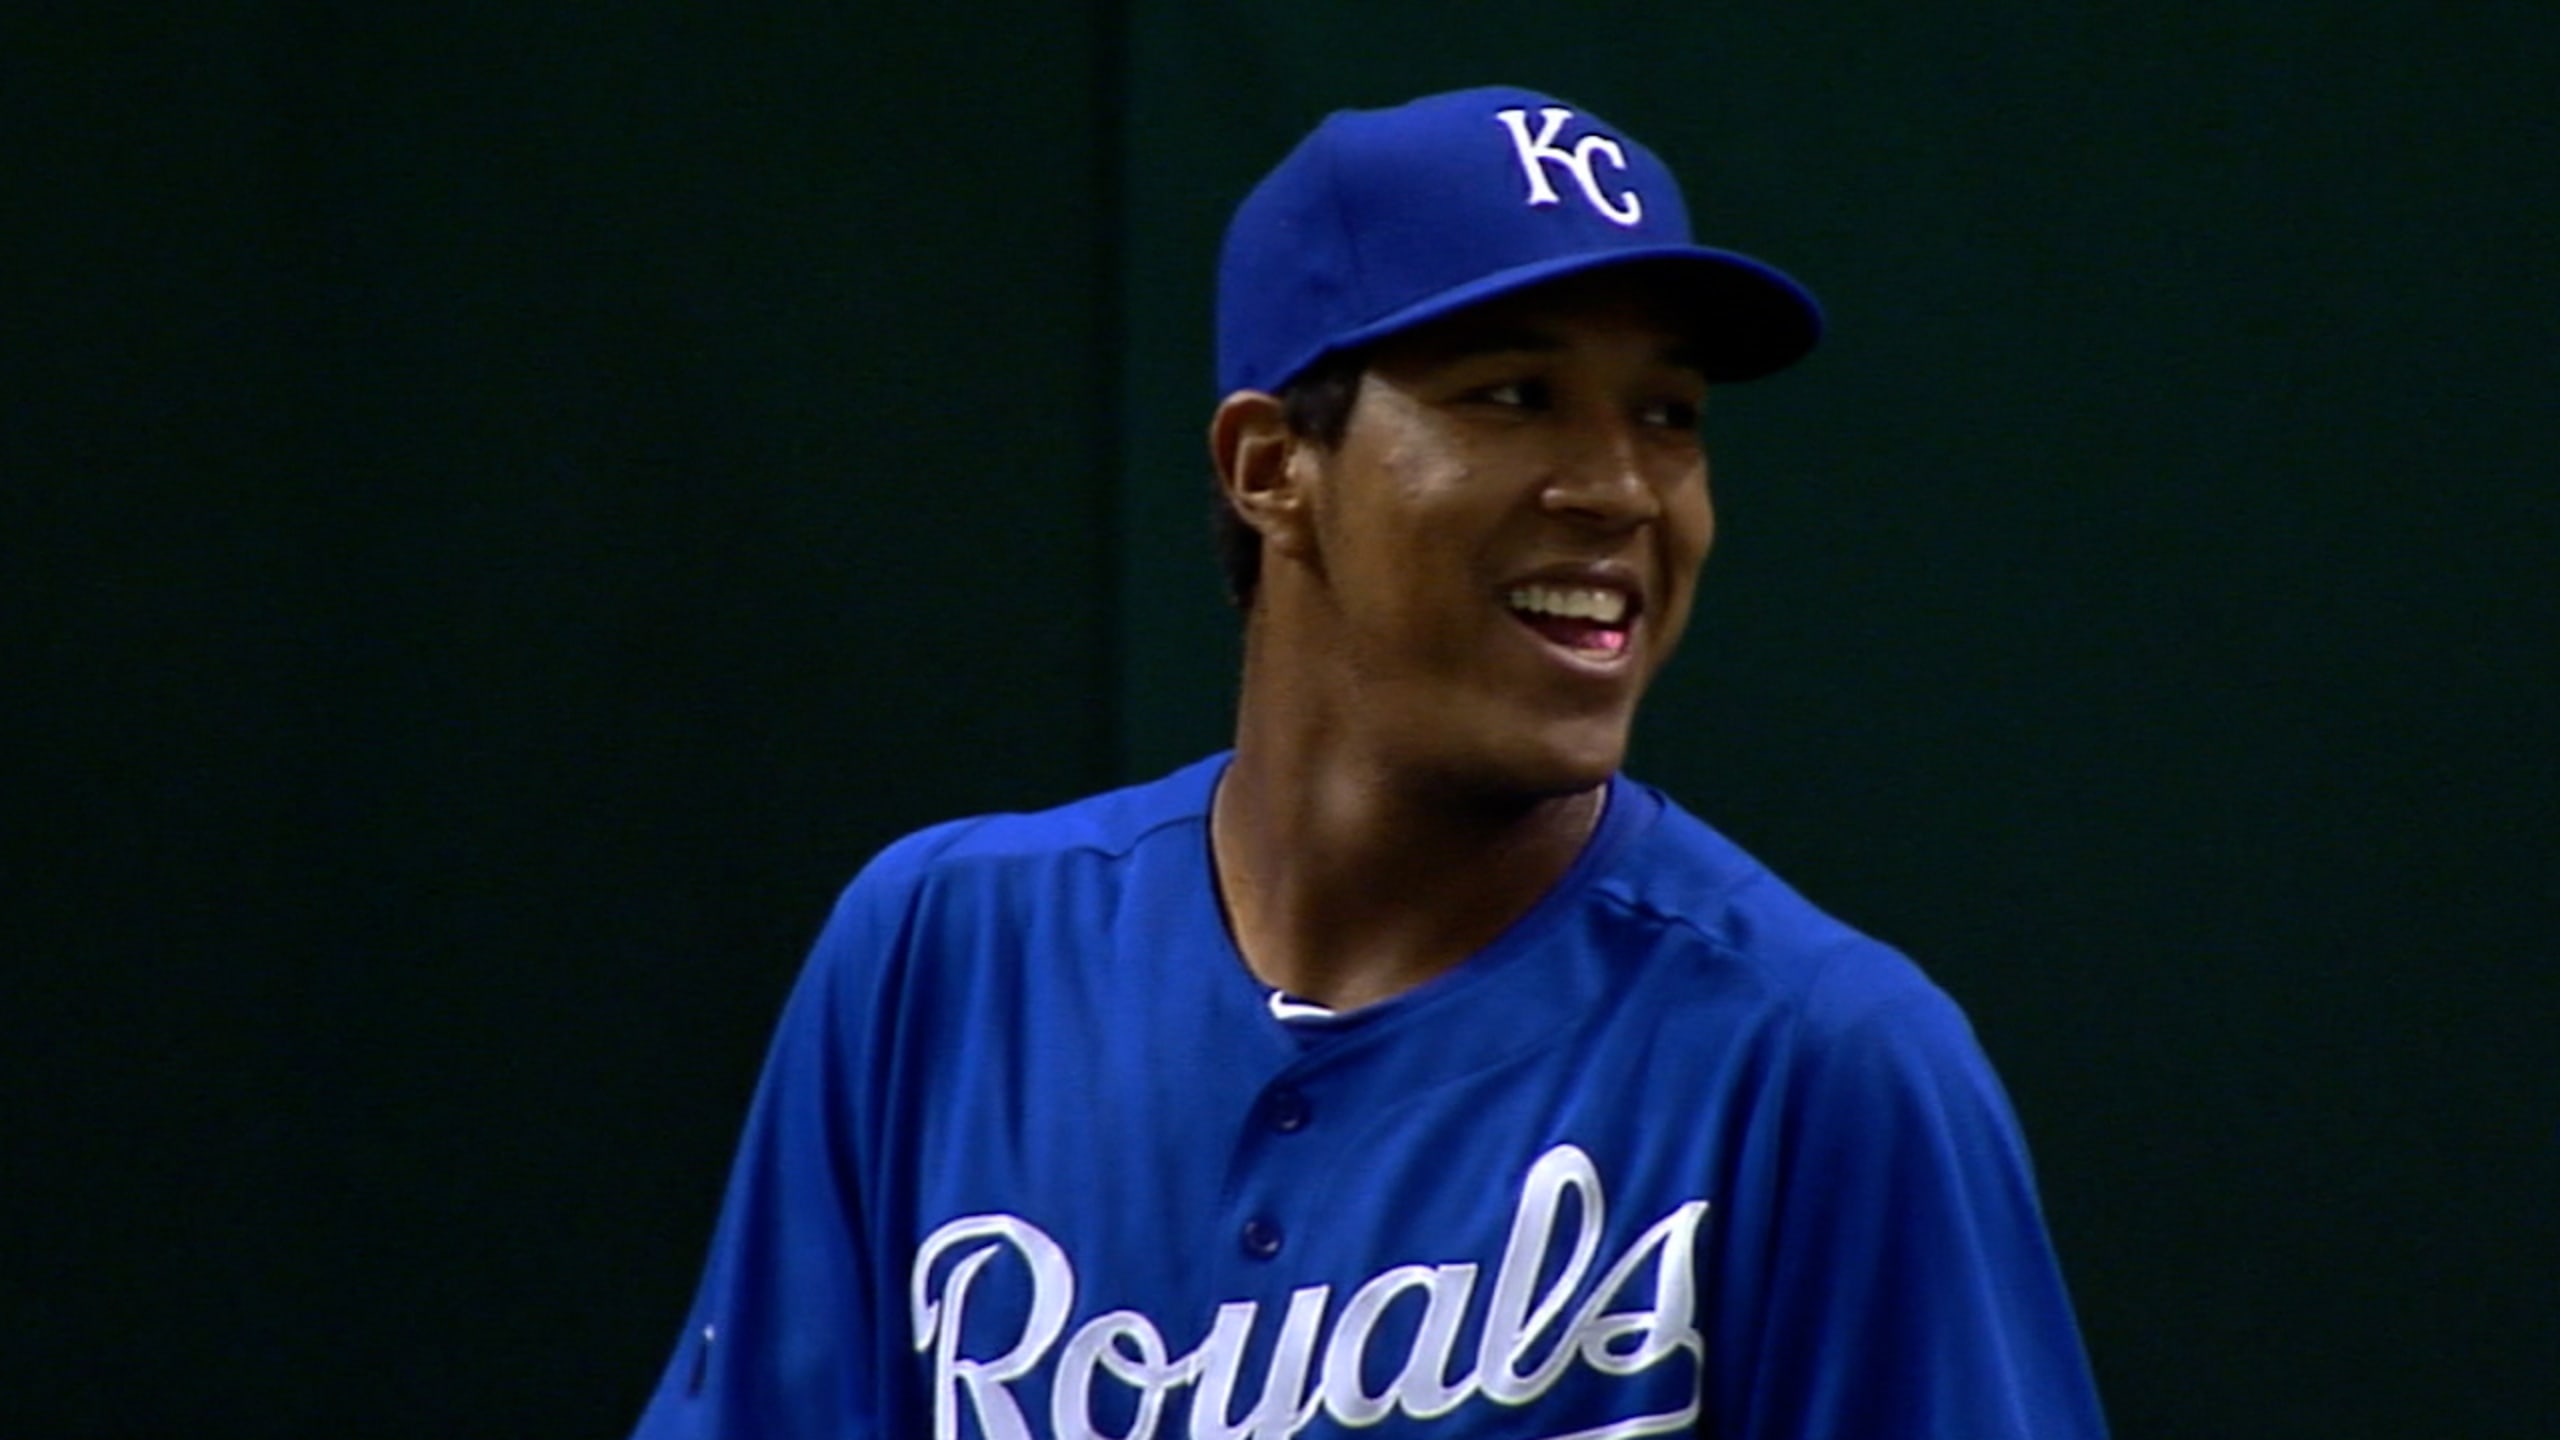 Smile: The Salvador Perez Story. From humble beginnings to a five